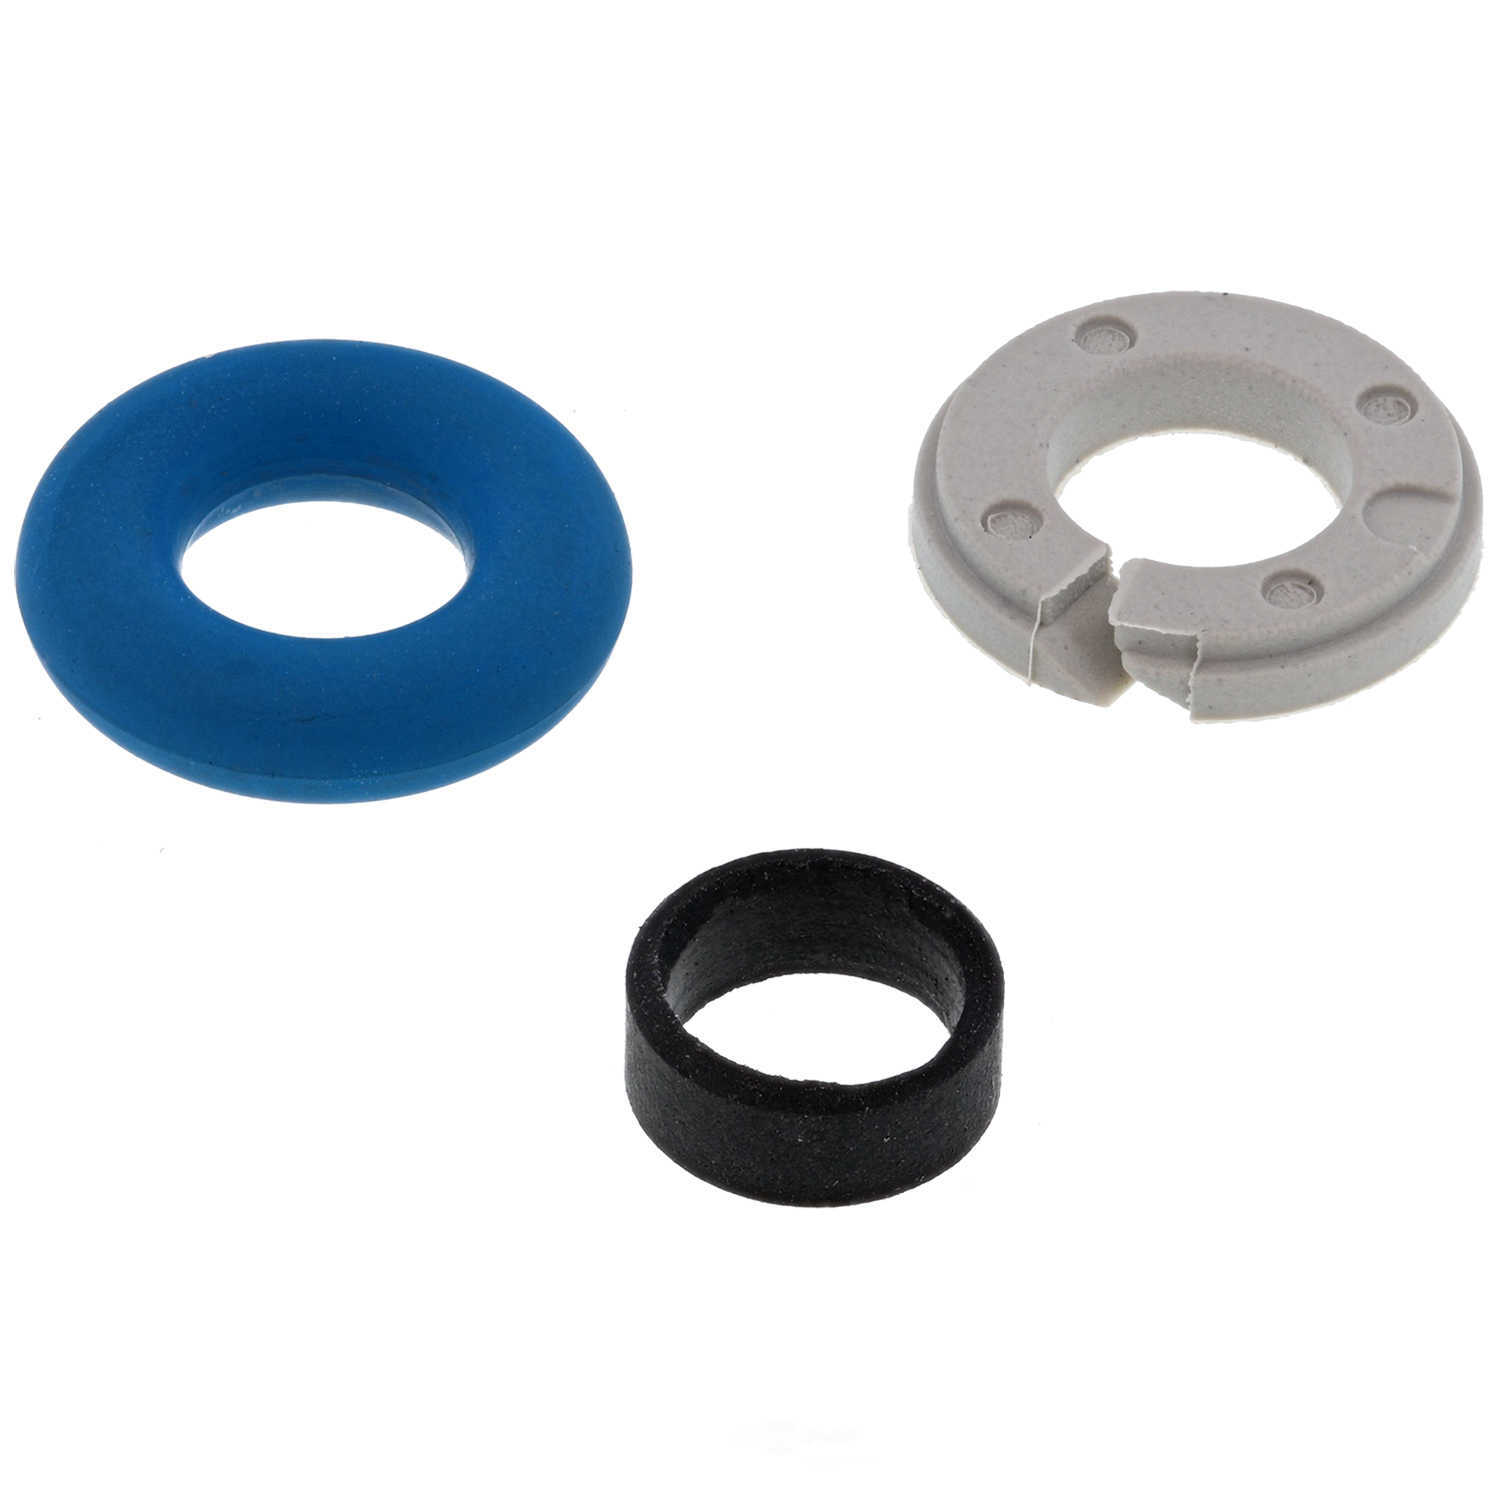 GB REMANUFACTURING INC. - Fuel Injector Seal Kit - GBR 8-078